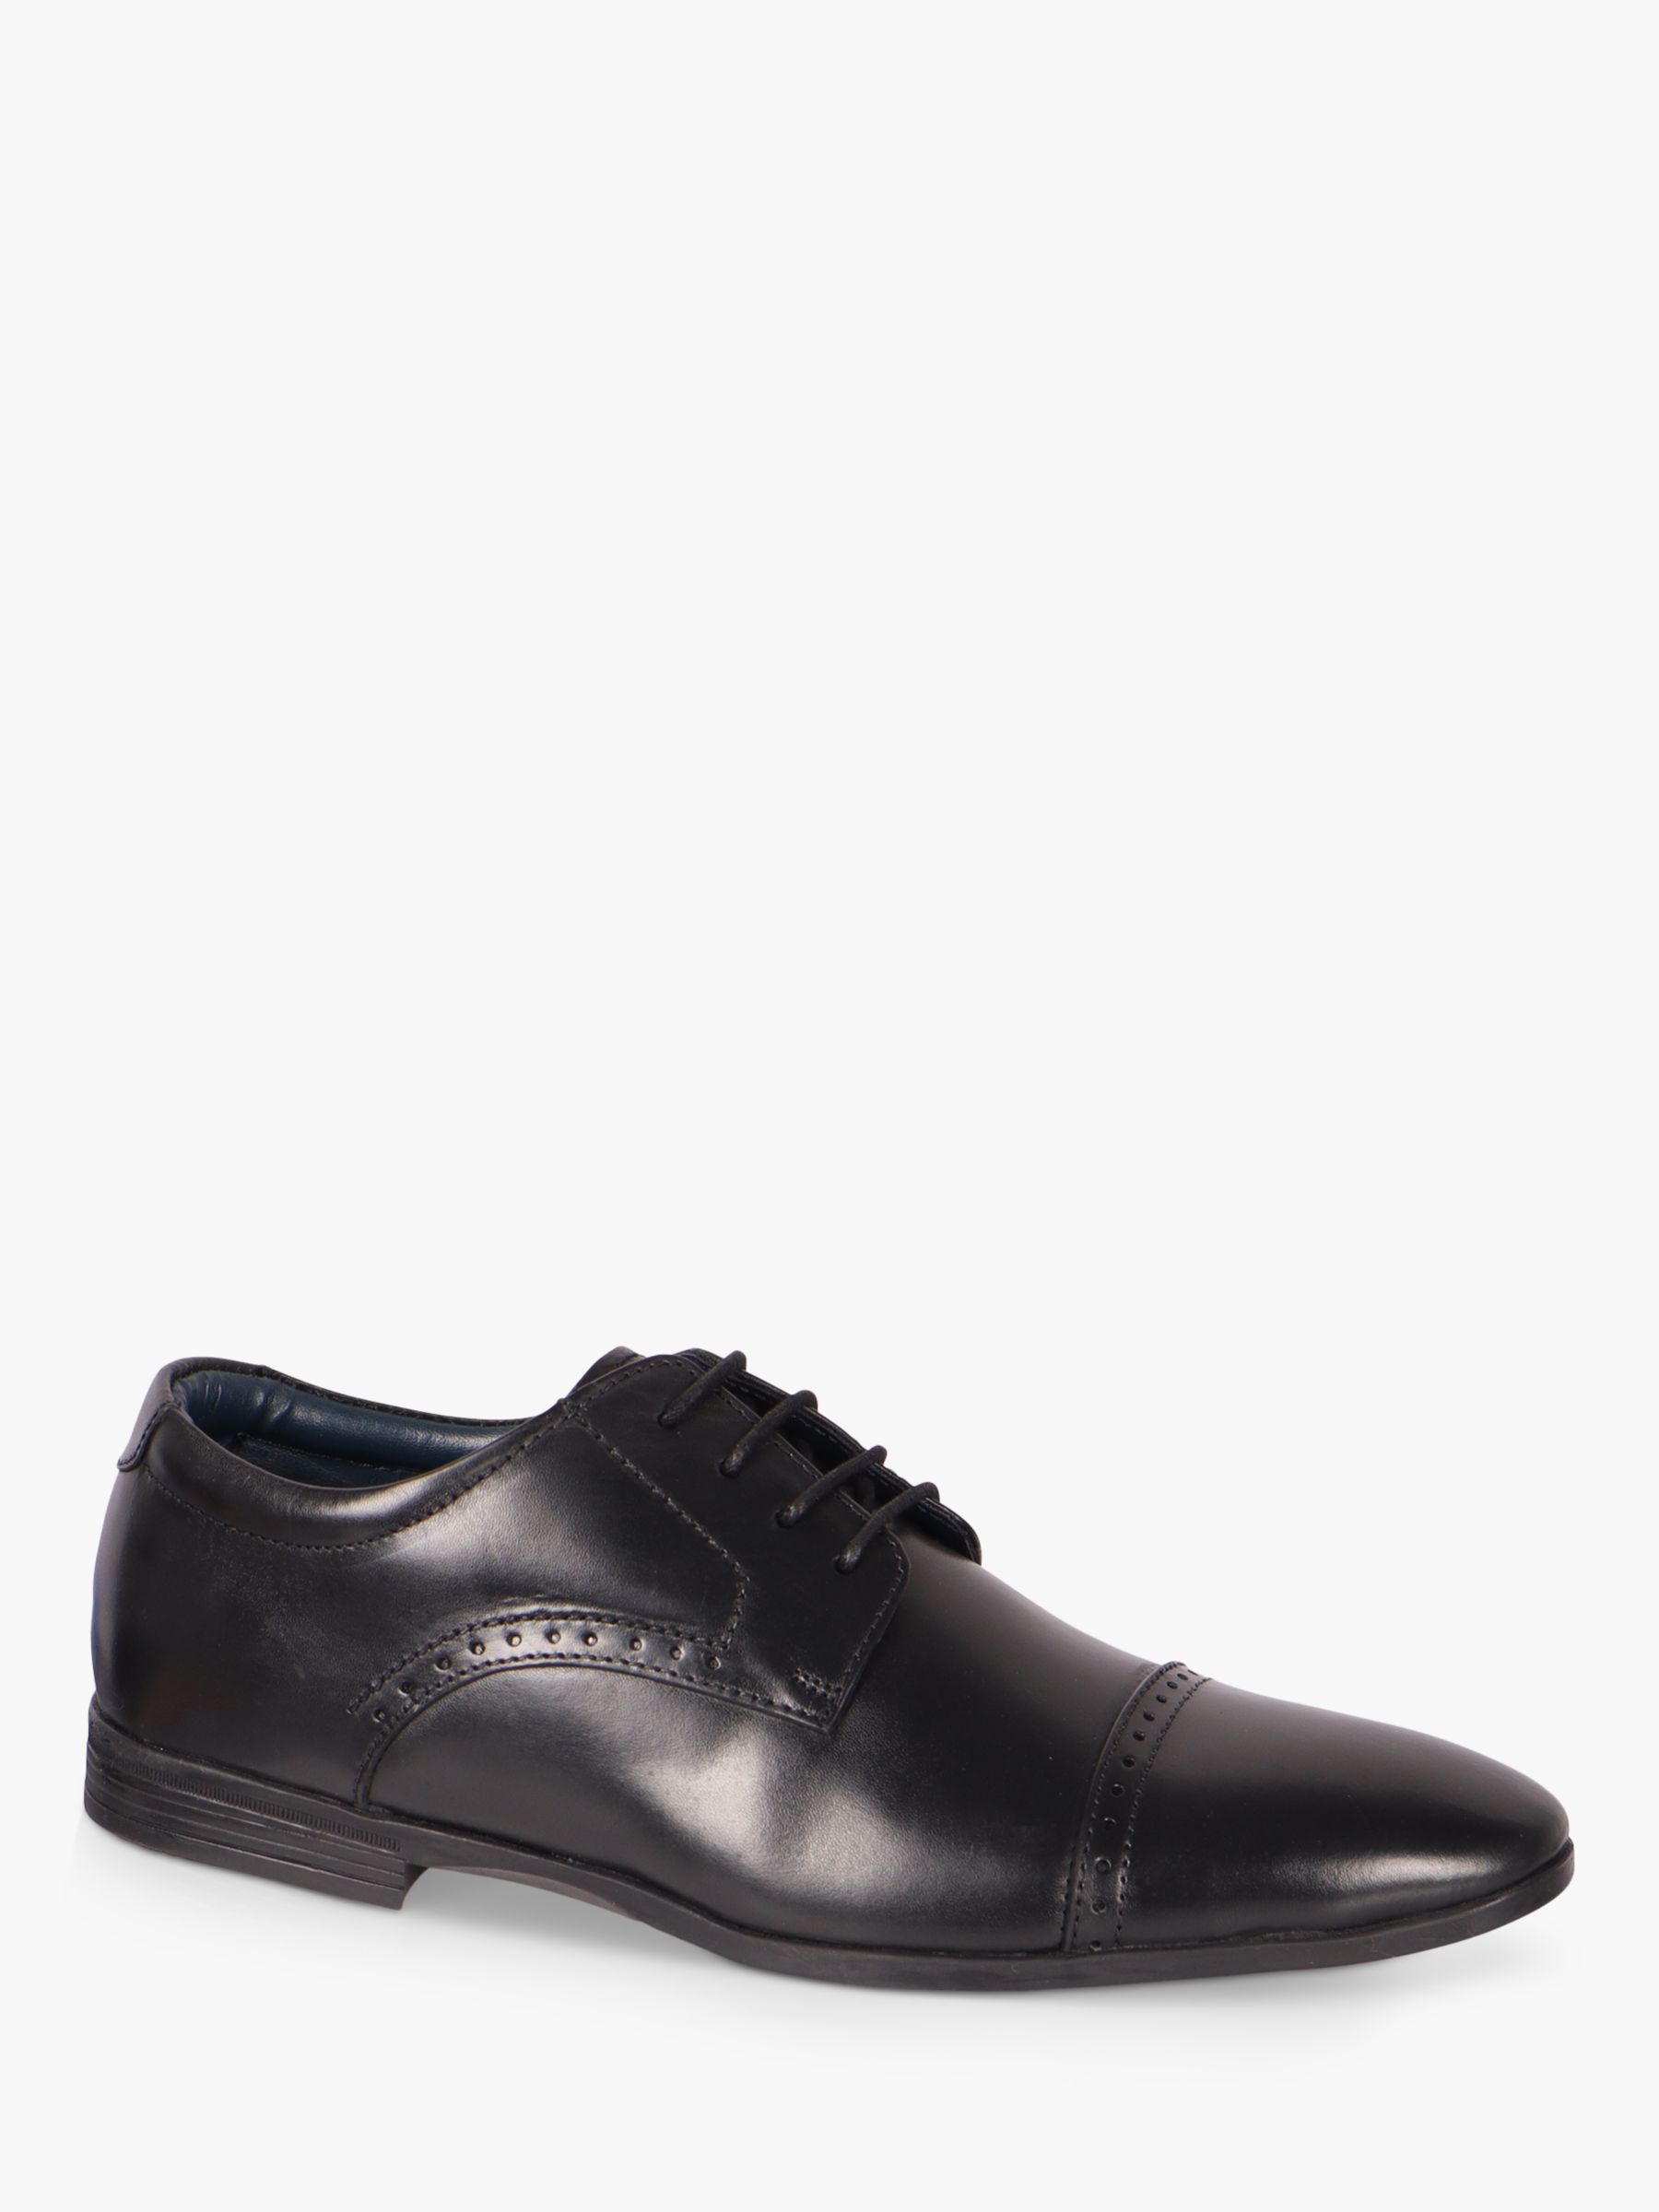 Silver Street London Lawrence Leather Brogues, Black, 7